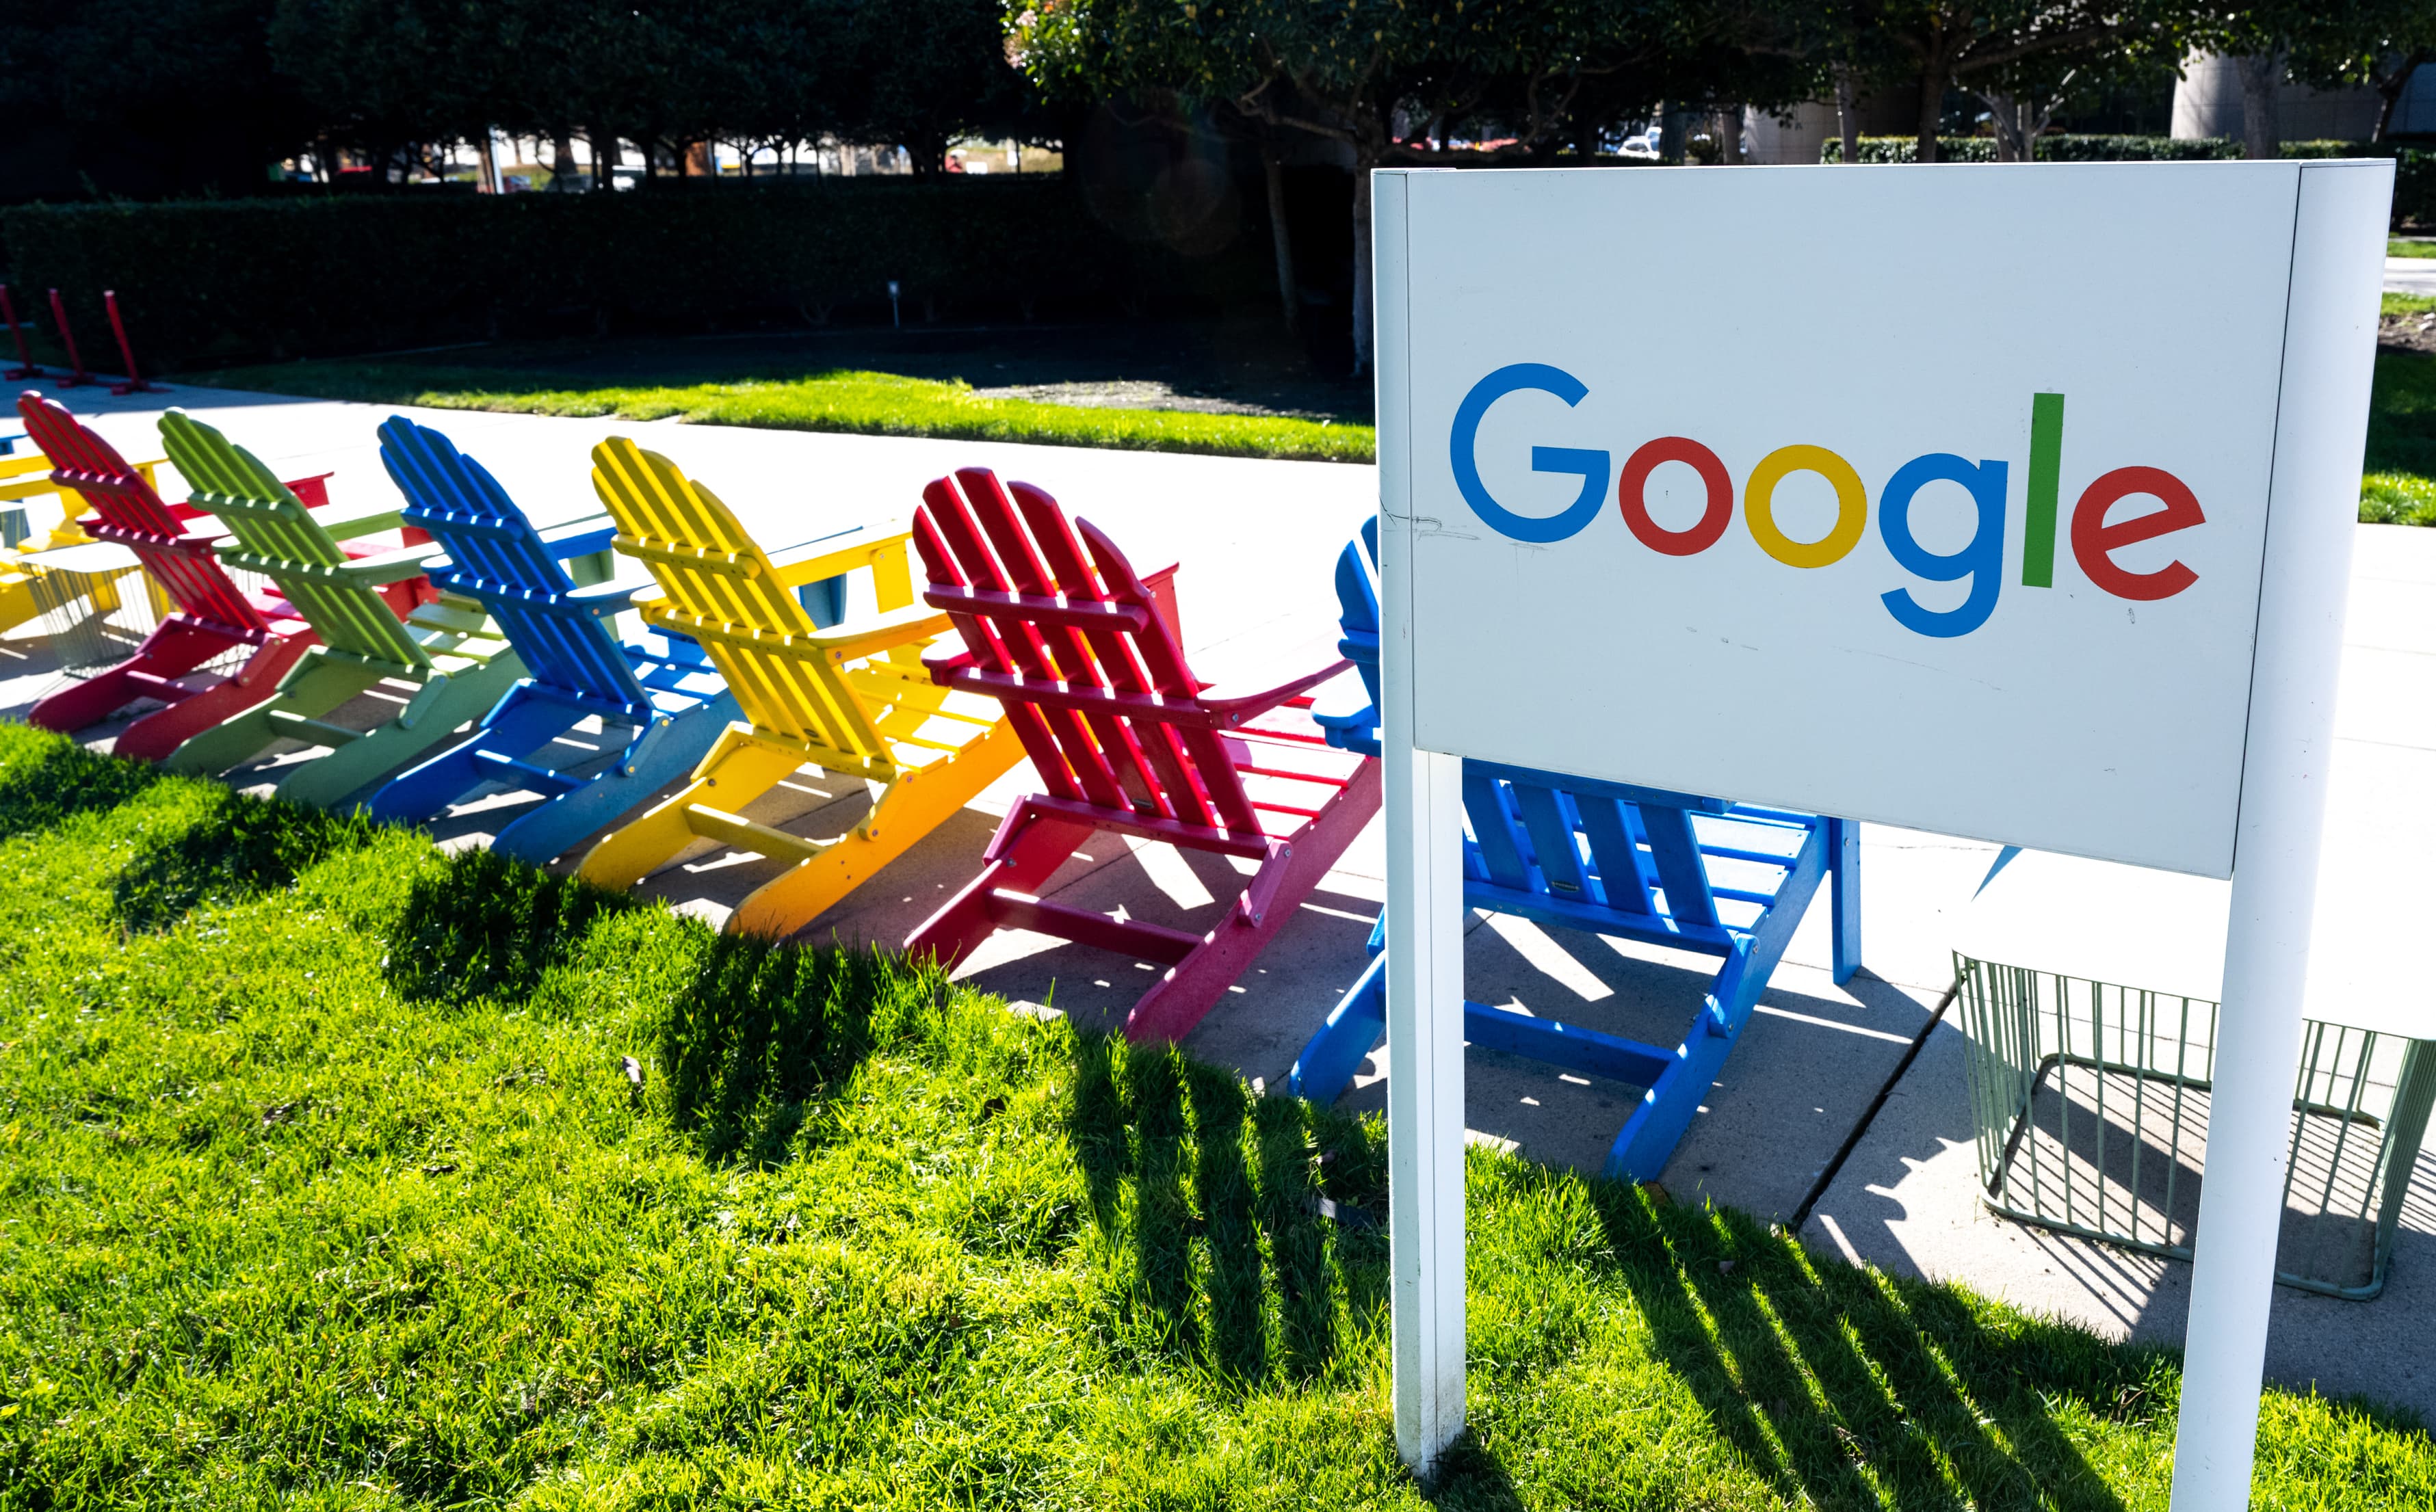 Will Google's on-campus hotel help lure employees back into the
office?